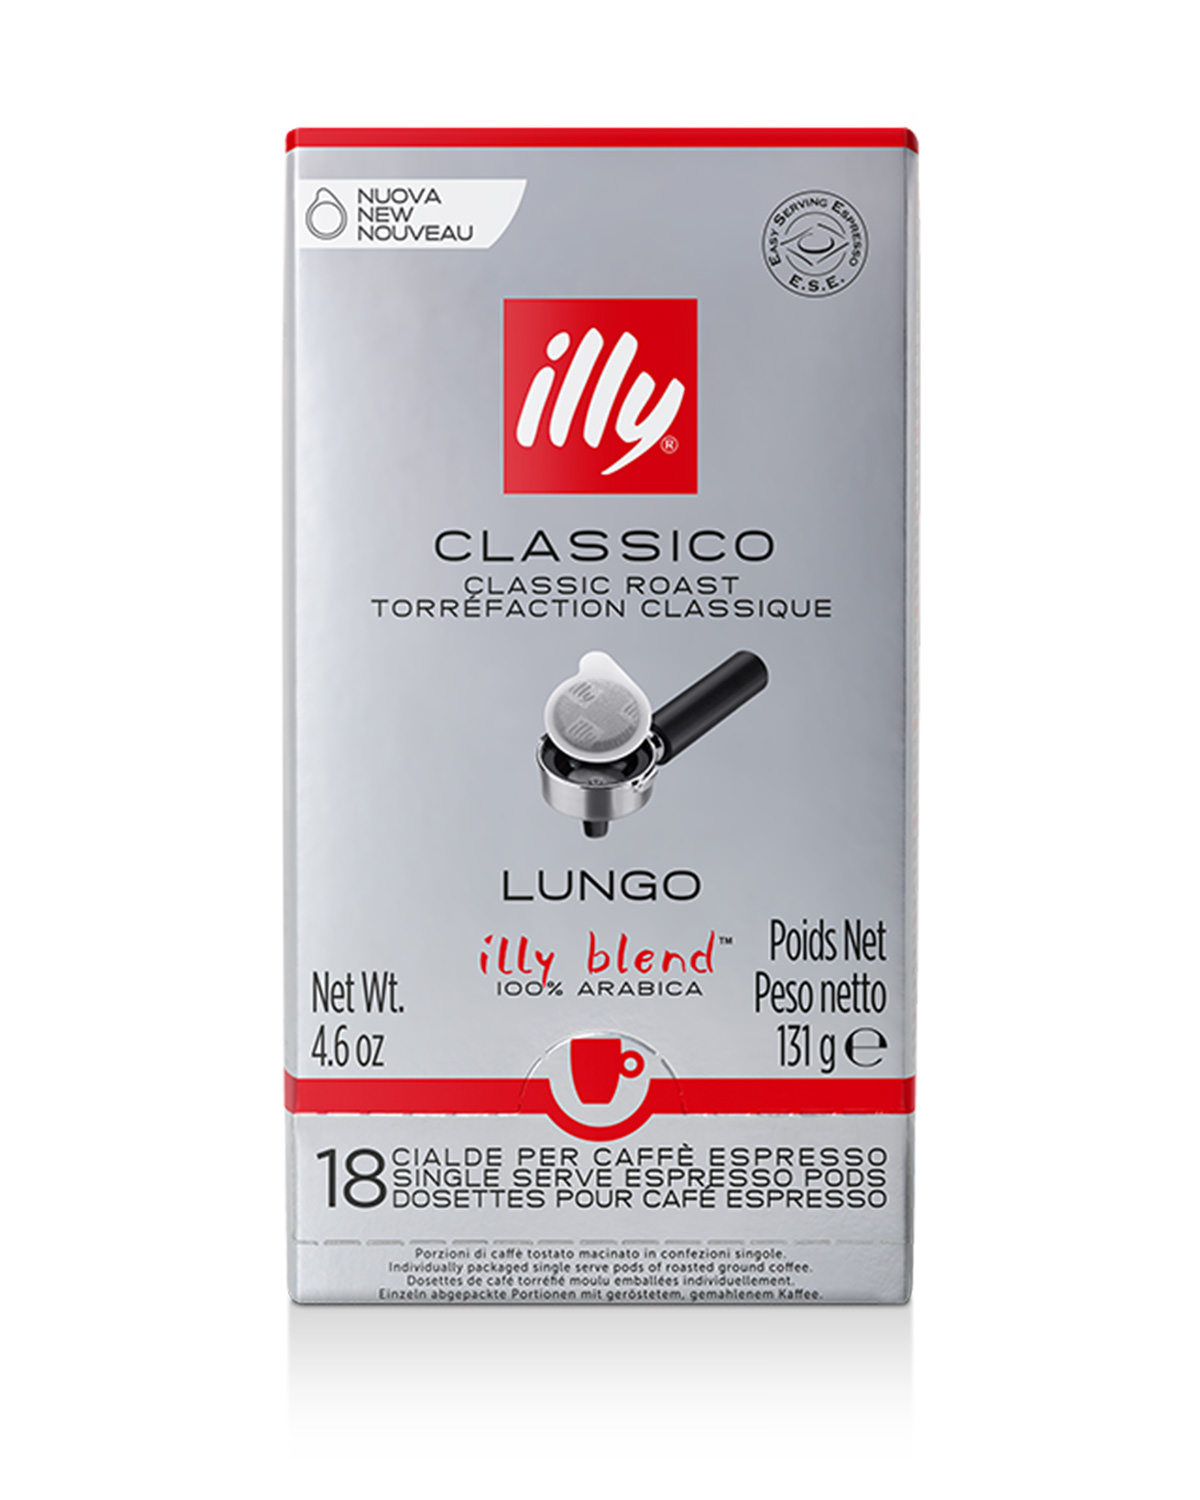 illy – Classico Lungo  Lager Schlieren, Illy, E.S.E. Pads